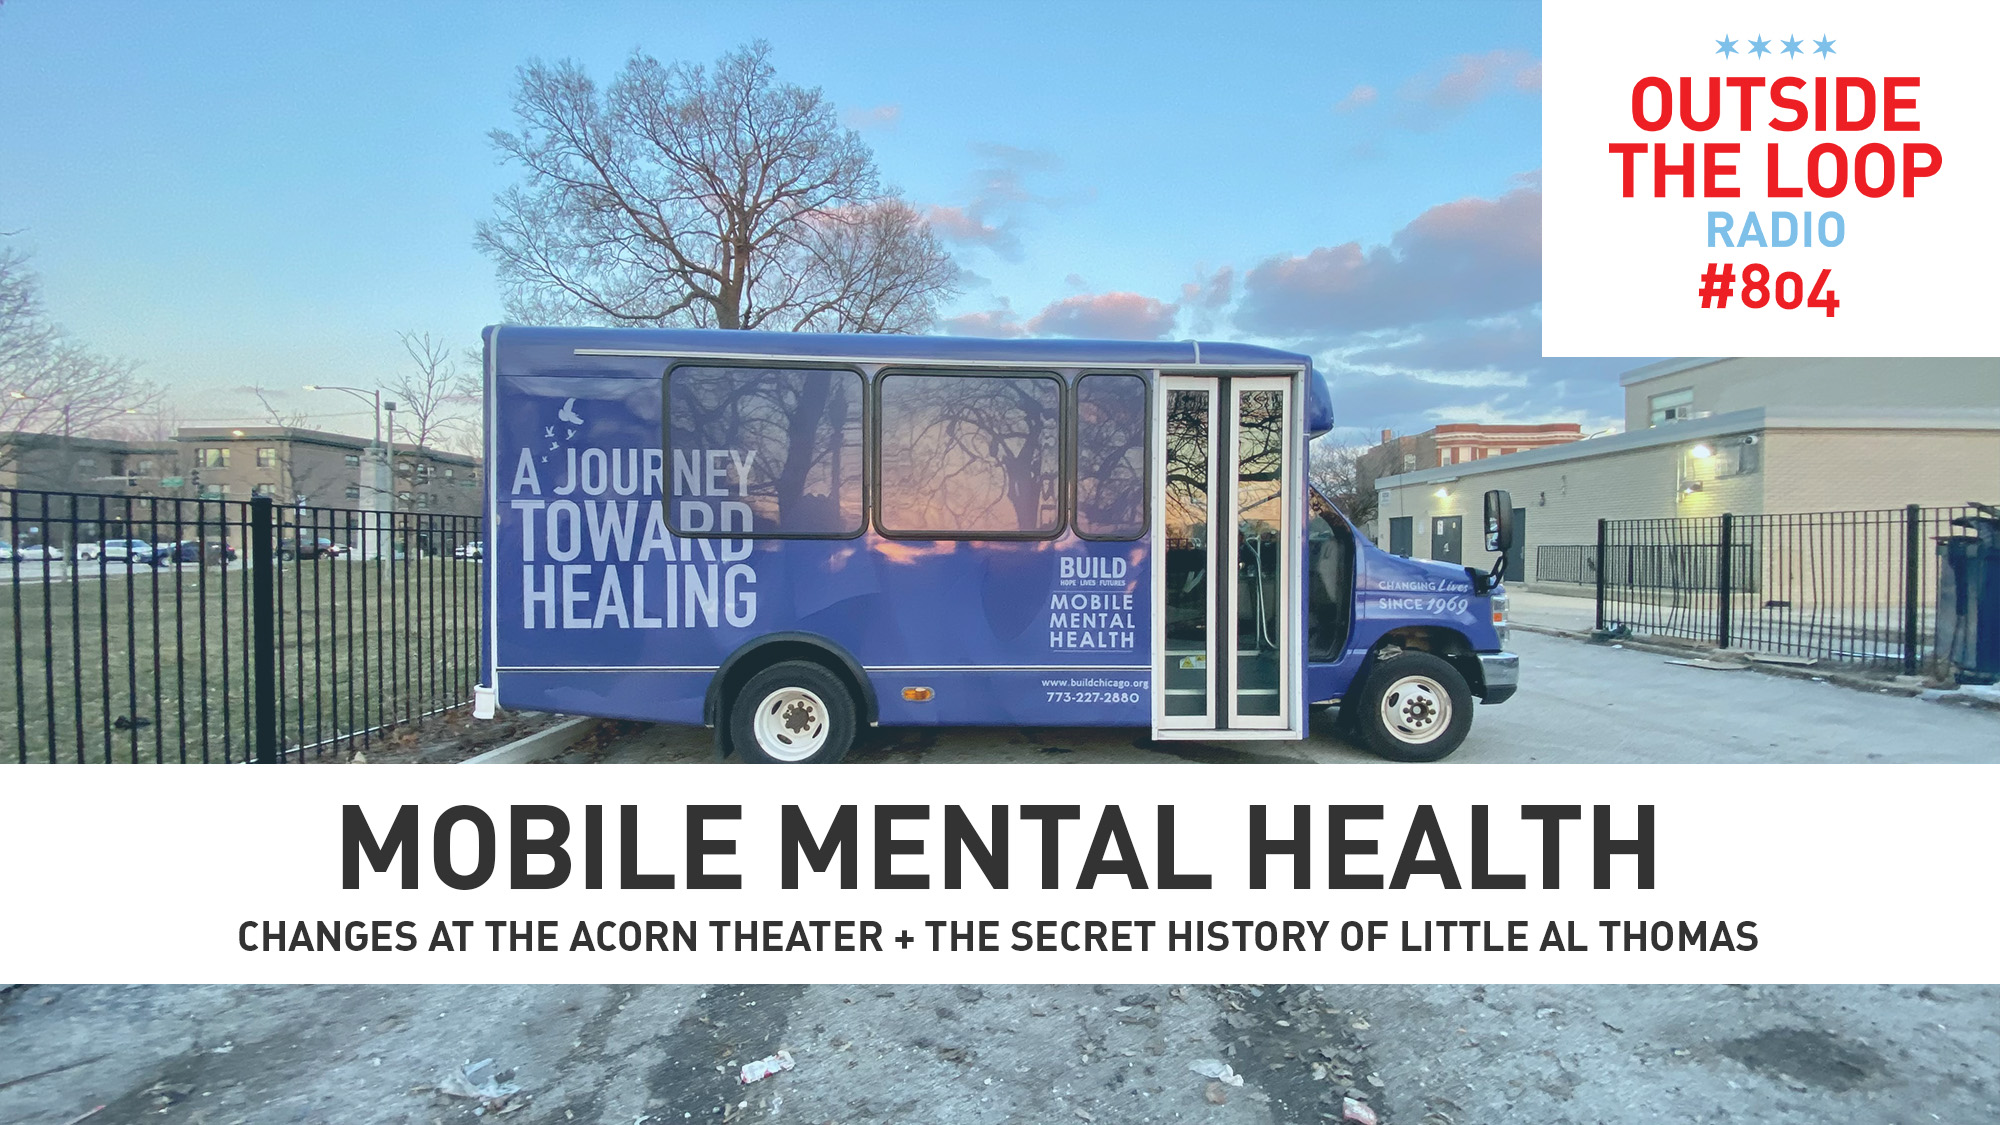 BUILD Chicago’s Mobile Mental Health Bus. (Photo credit: Mike Stephen/WGN Radio).